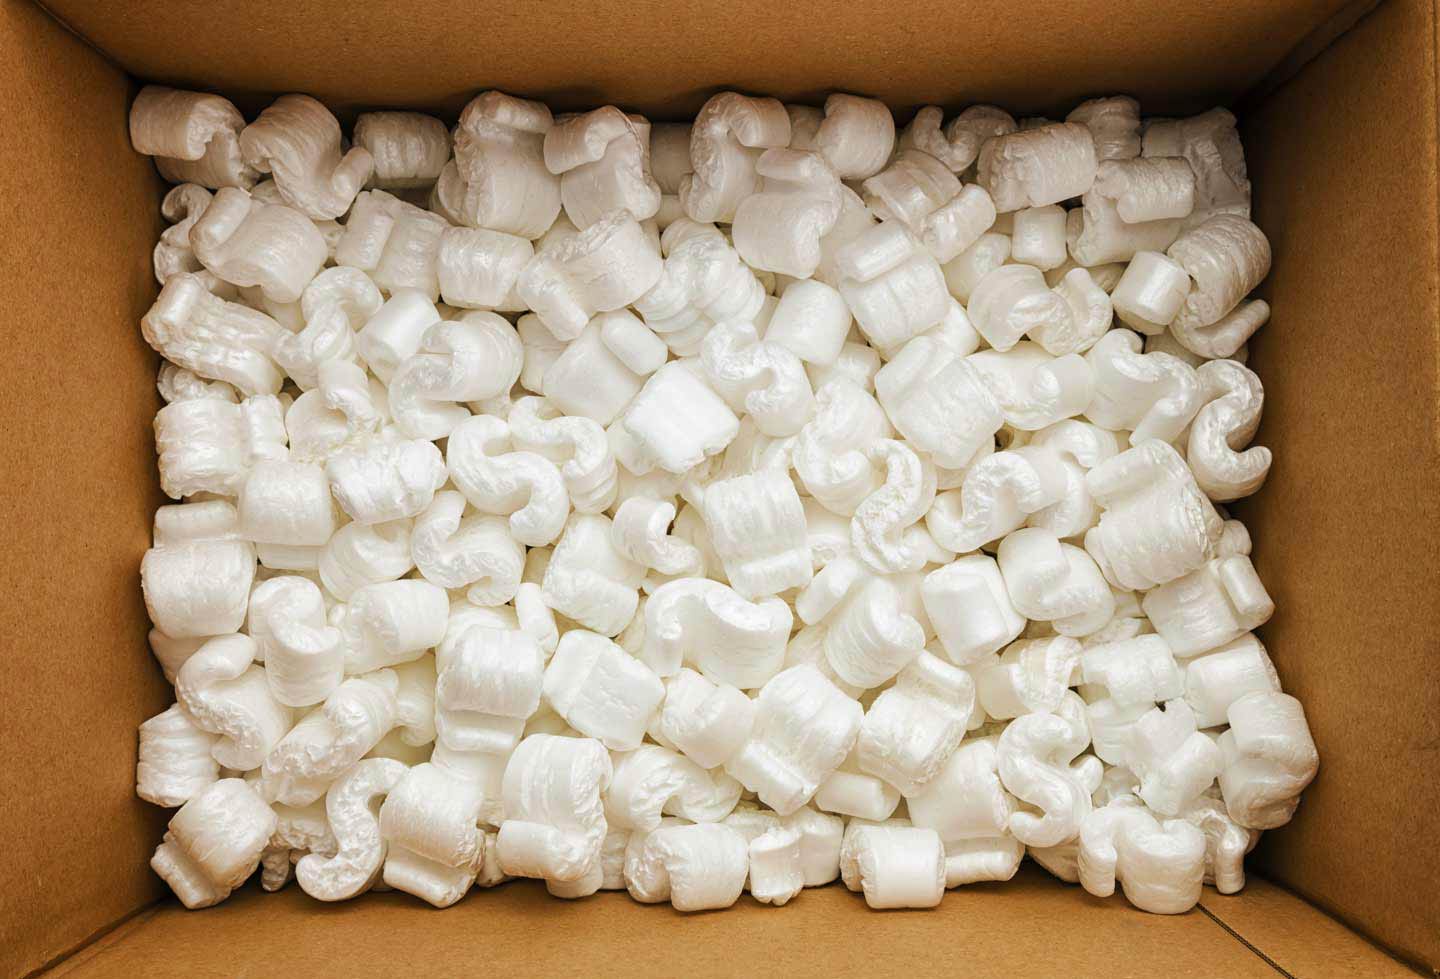 Open cardboard box filled with white styrofoam packing peanuts